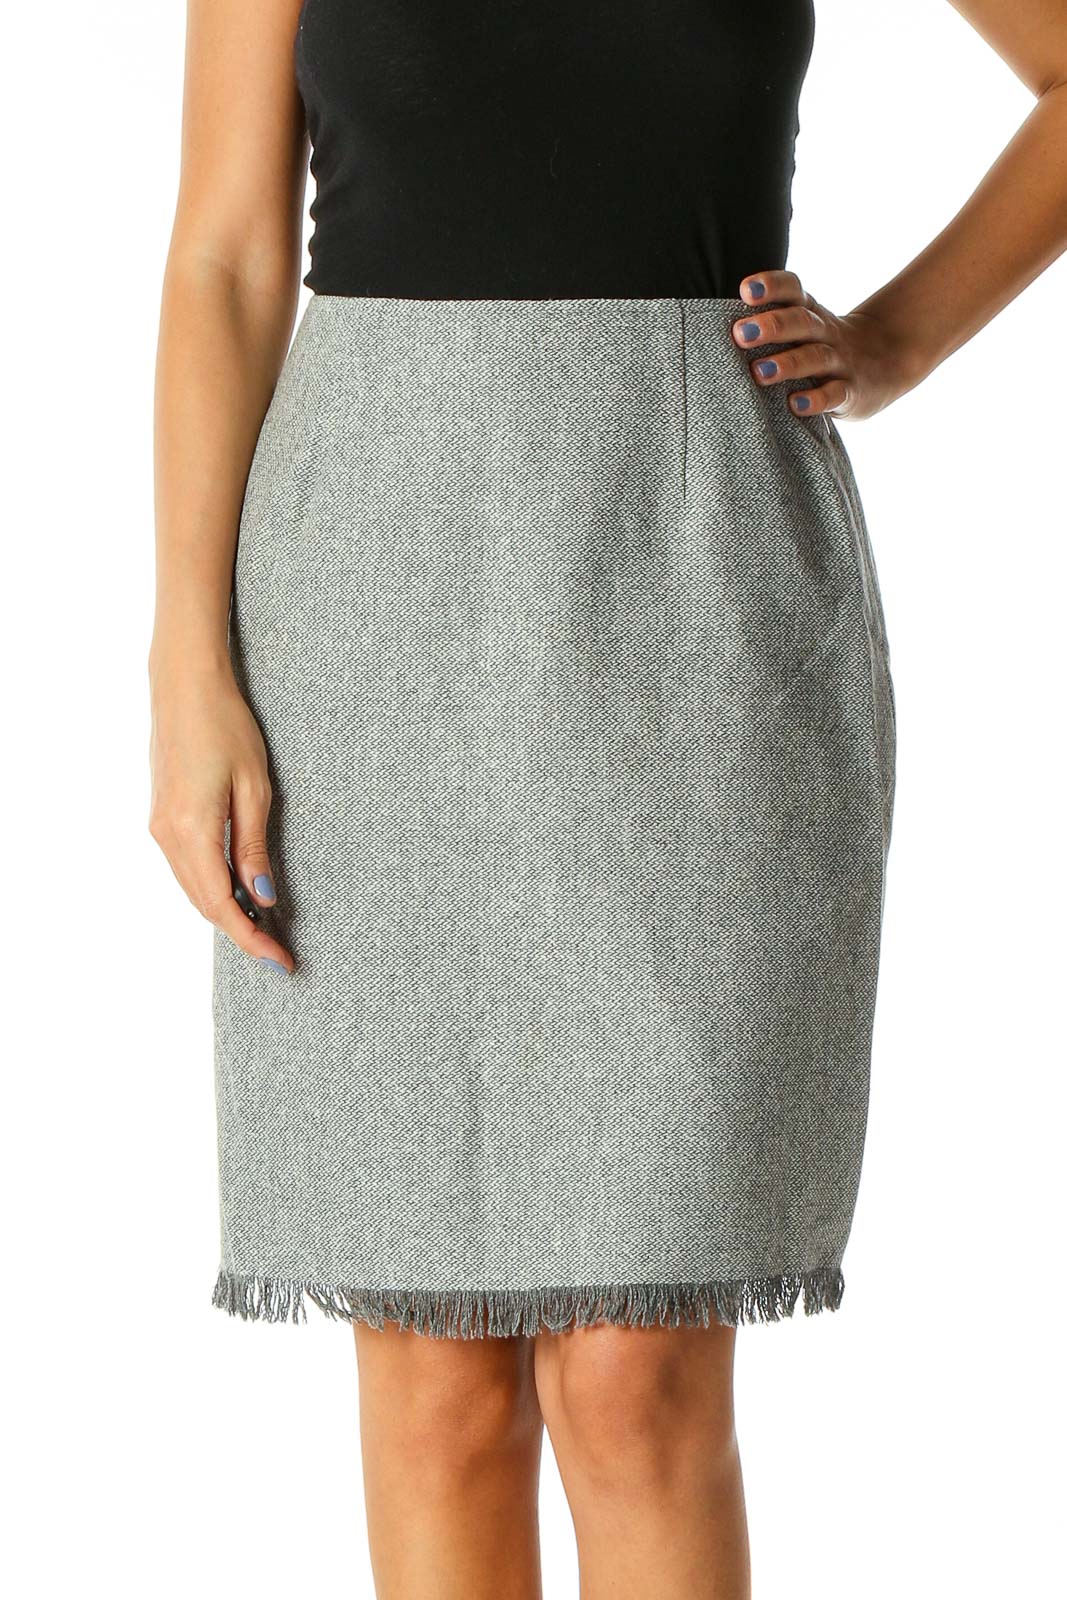 Gray Textured Chic Straight Skirt Front